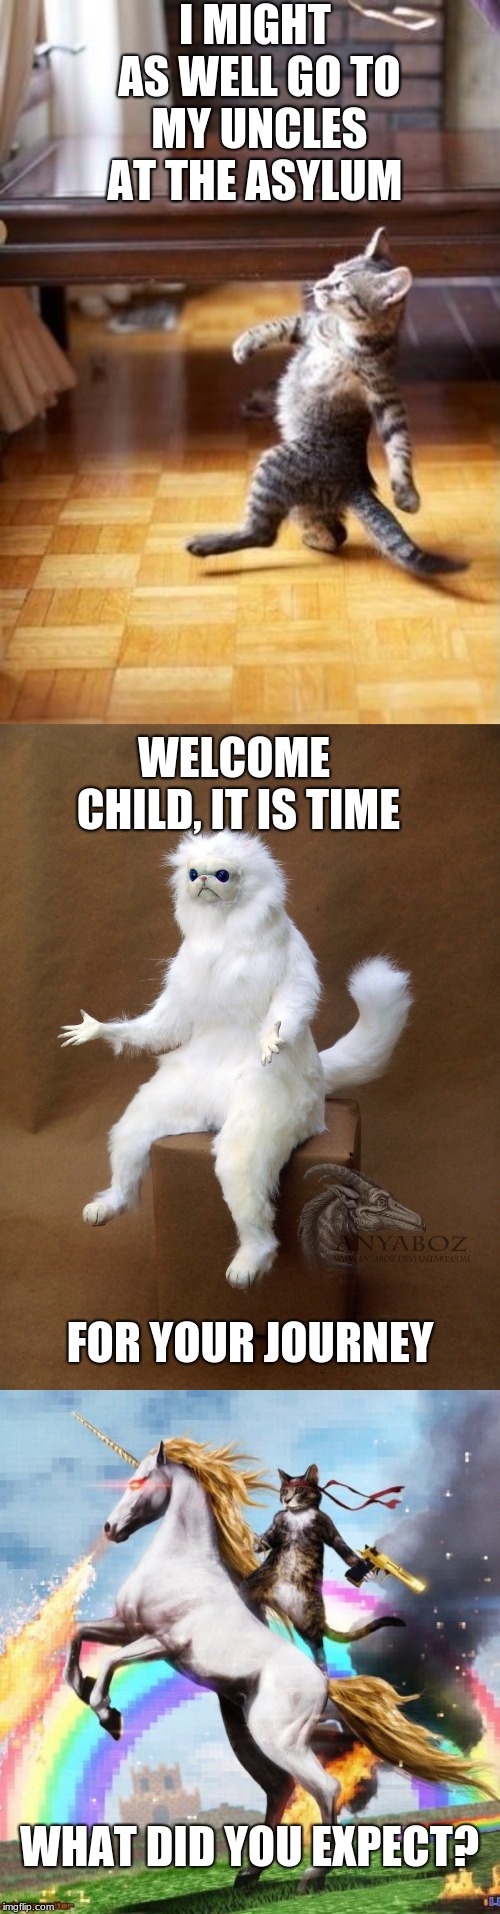 I MIGHT AS WELL GO TO MY UNCLES AT THE ASYLUM; WELCOME CHILD, IT IS TIME; FOR YOUR JOURNEY; WHAT DID YOU EXPECT? | image tagged in memes,cool cat stroll,welcome to the internets,persian cat room guardian single | made w/ Imgflip meme maker